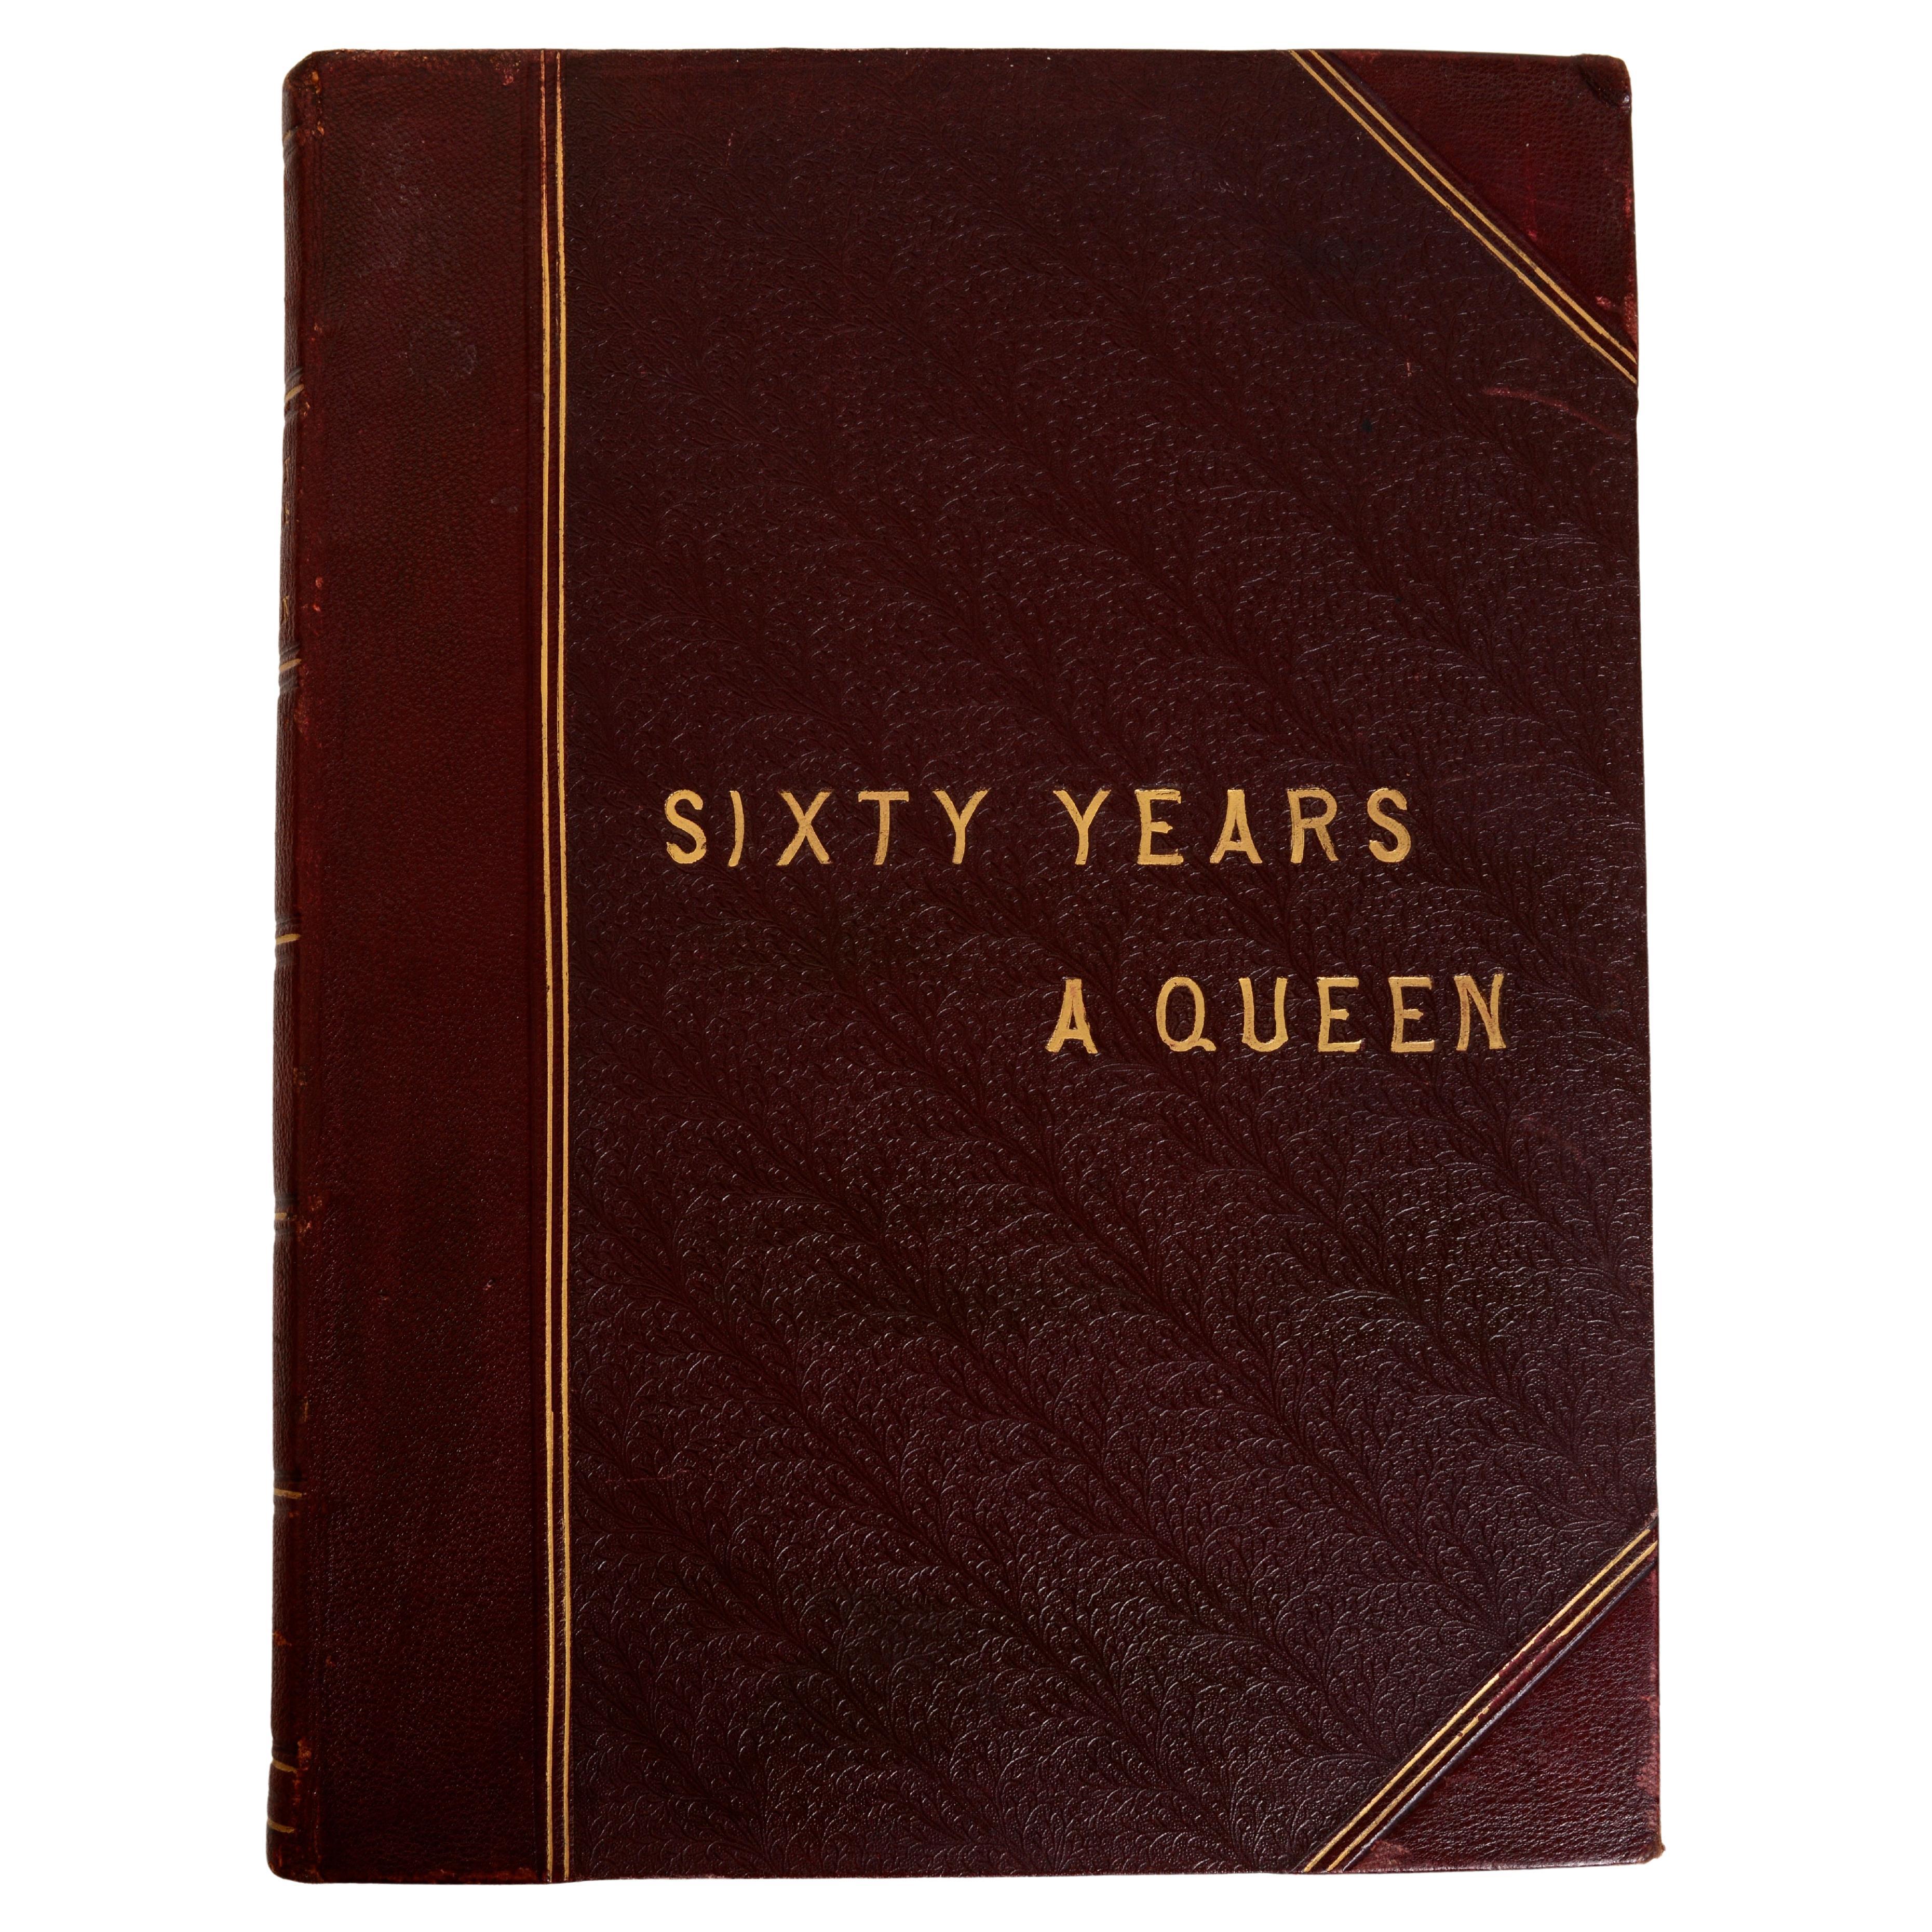 Sixty Years A Queen The Story Of Her Majesty's Reign (L'histoire de son règne), 1st Ed